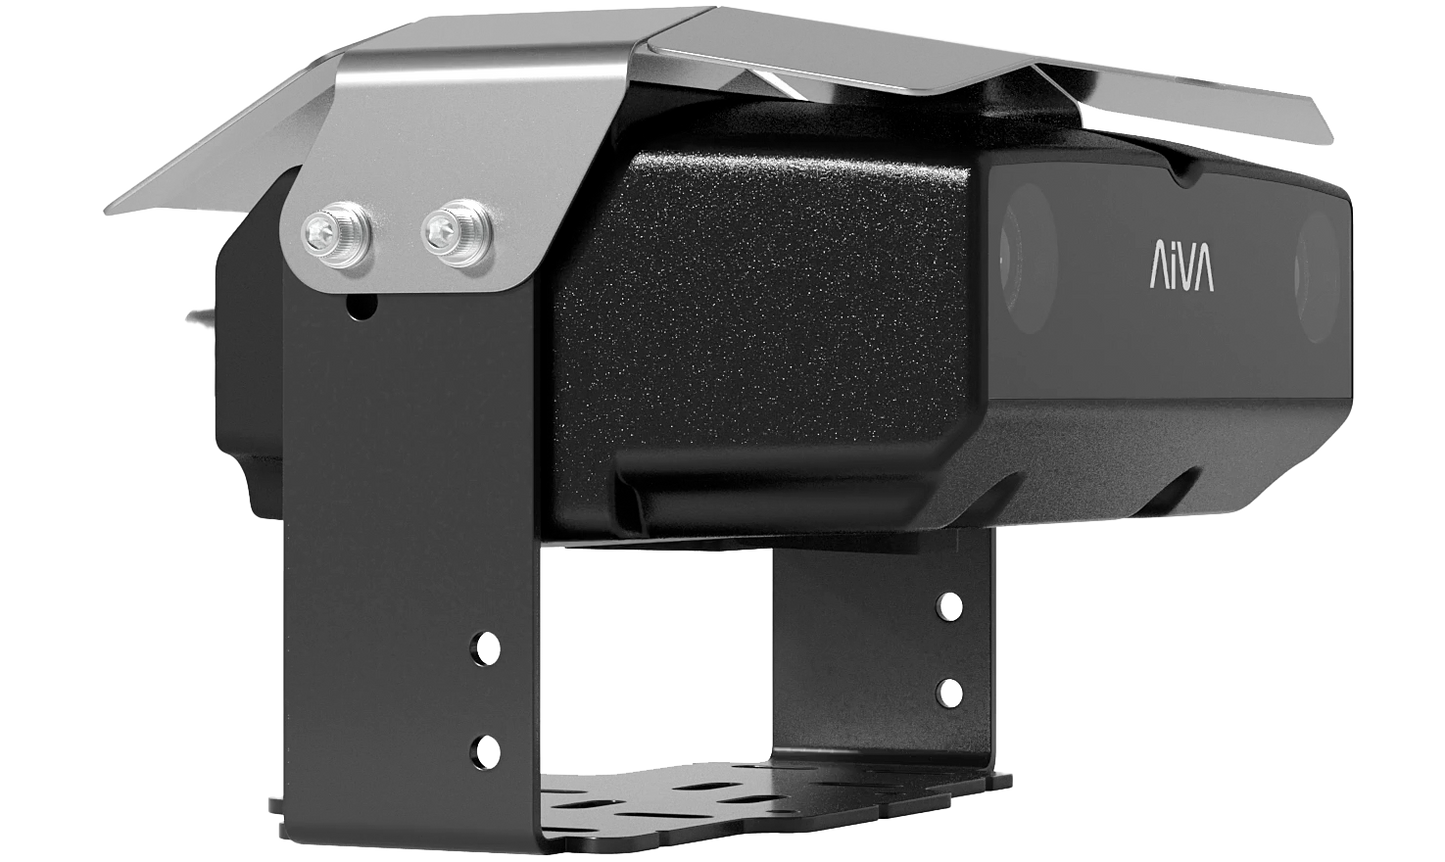 AiVA Camera Side View - Pedestrian Detection System